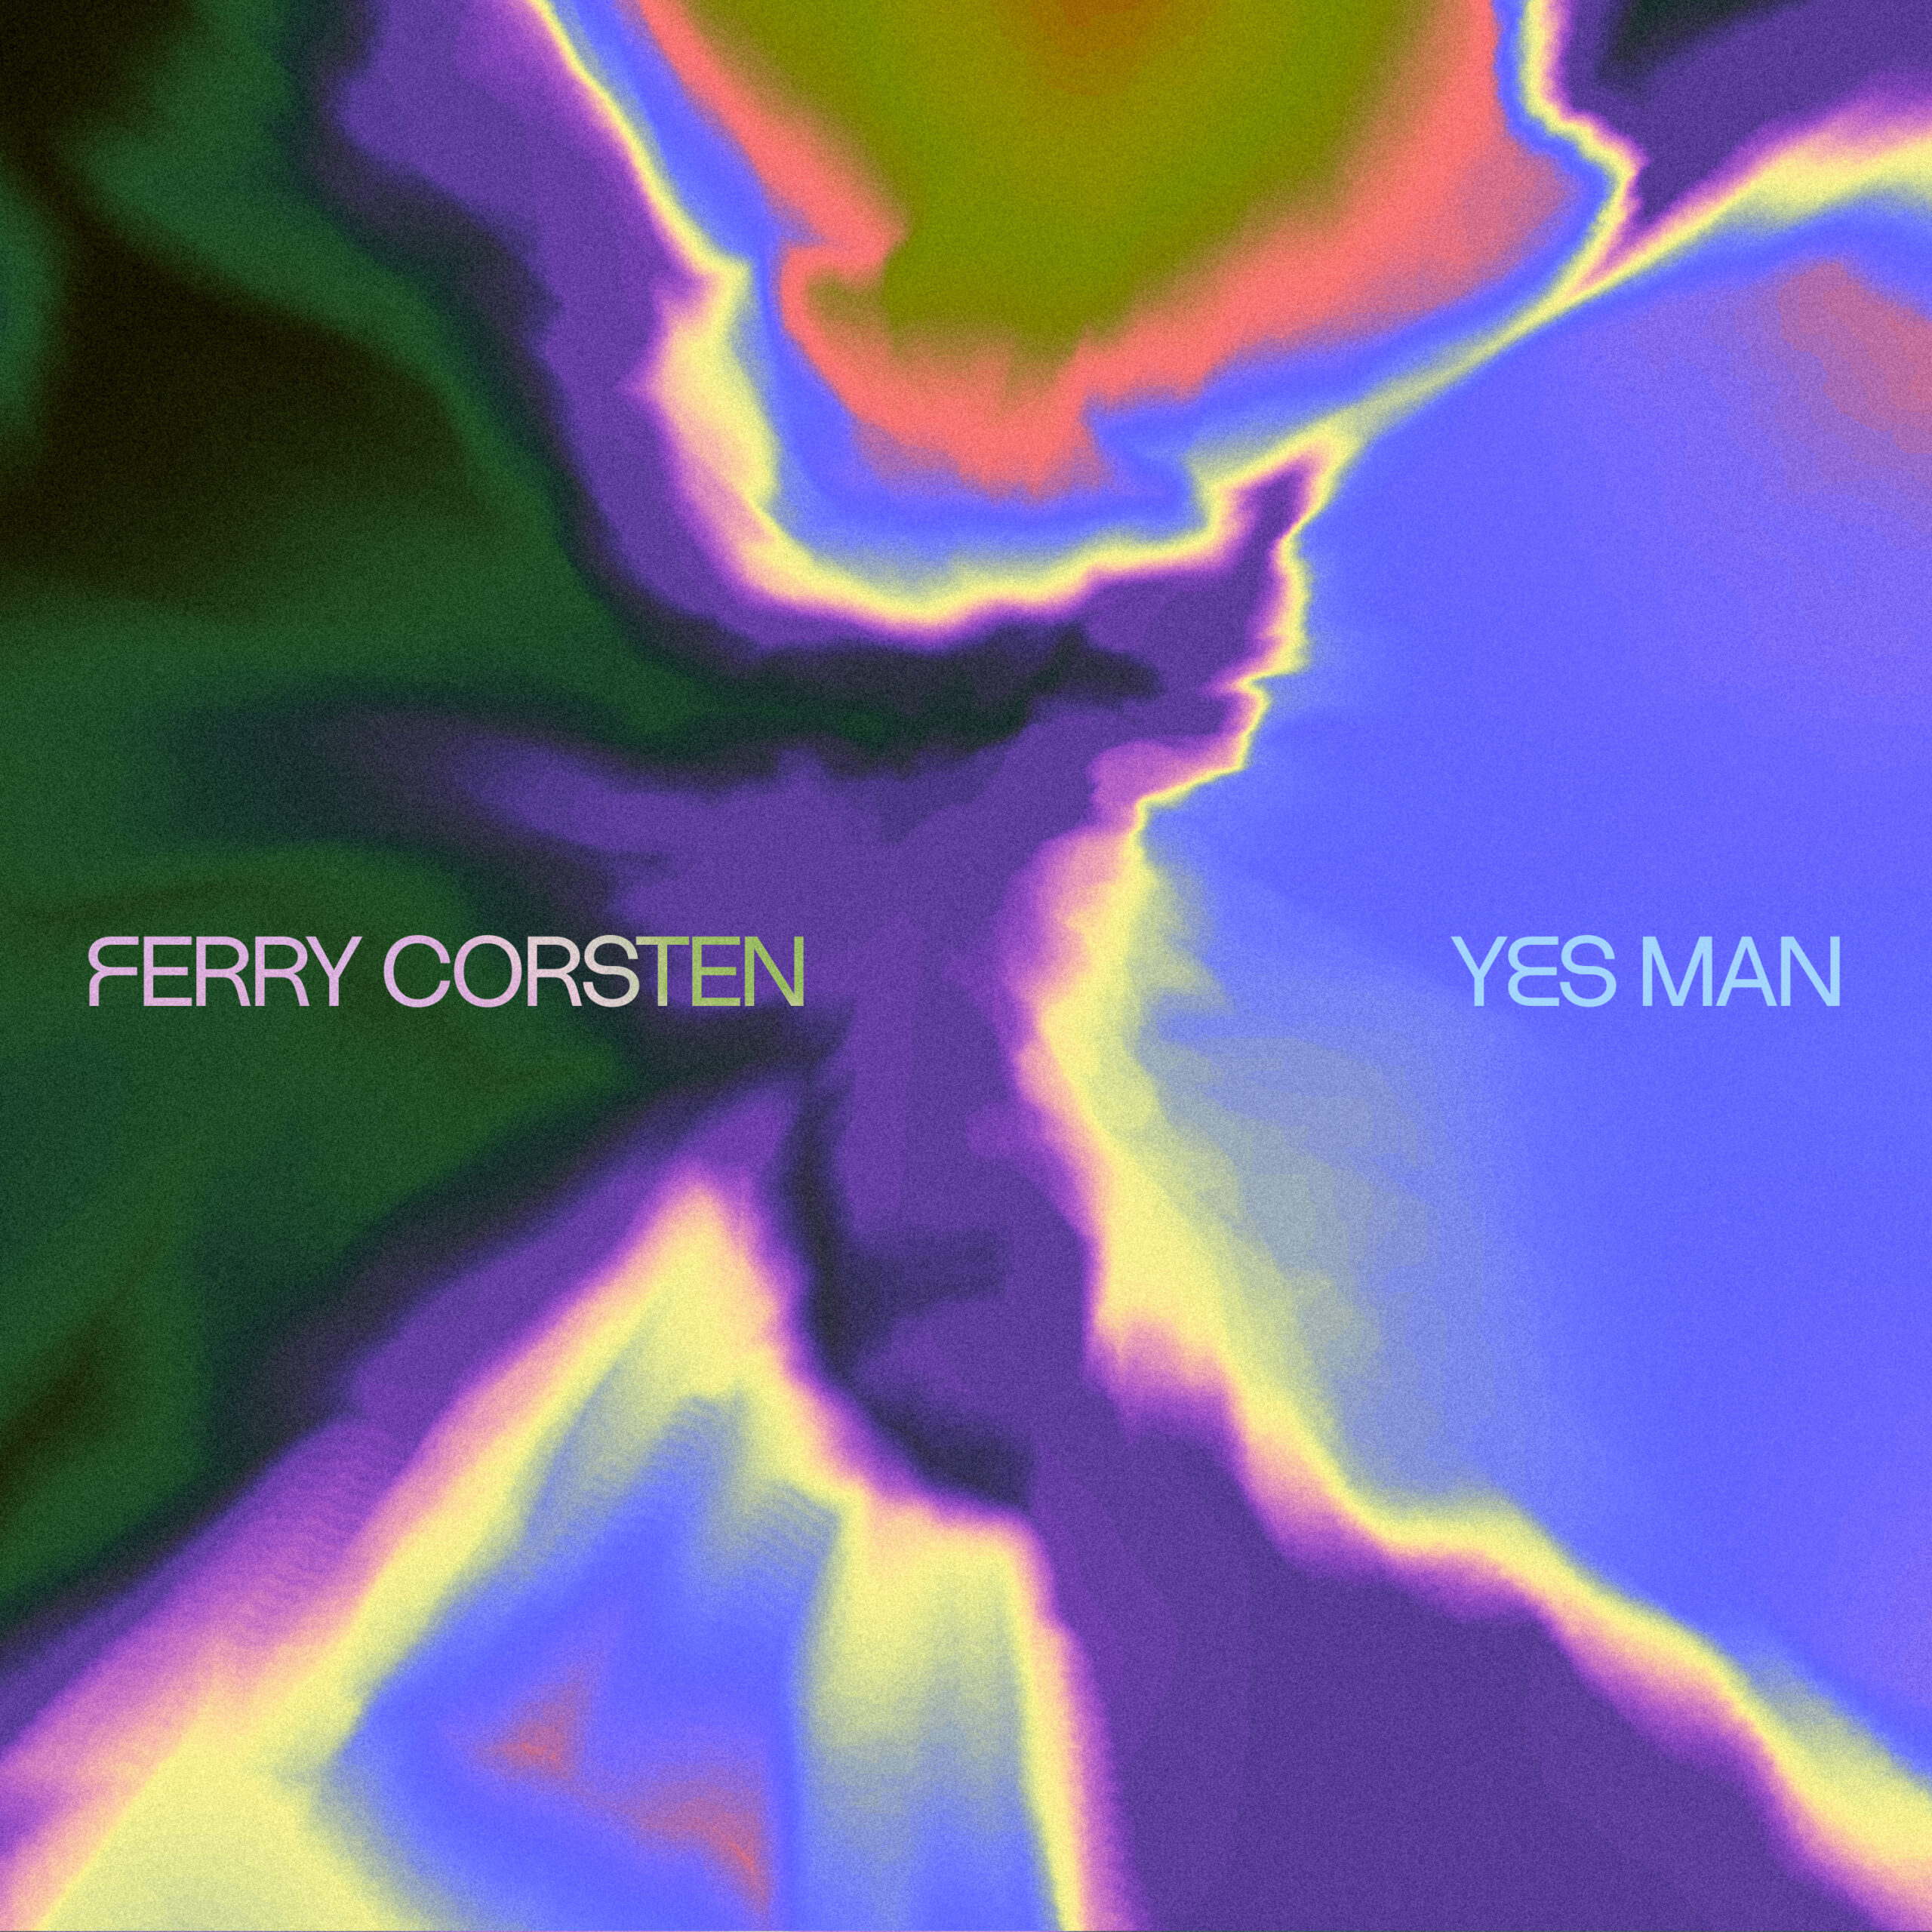 FERRY CORSTEN’S HEATER ‘YES MAN’ IS THE OFFICIAL RAVE ANTHEM OF DREAMFIELDS MEXICO 2023